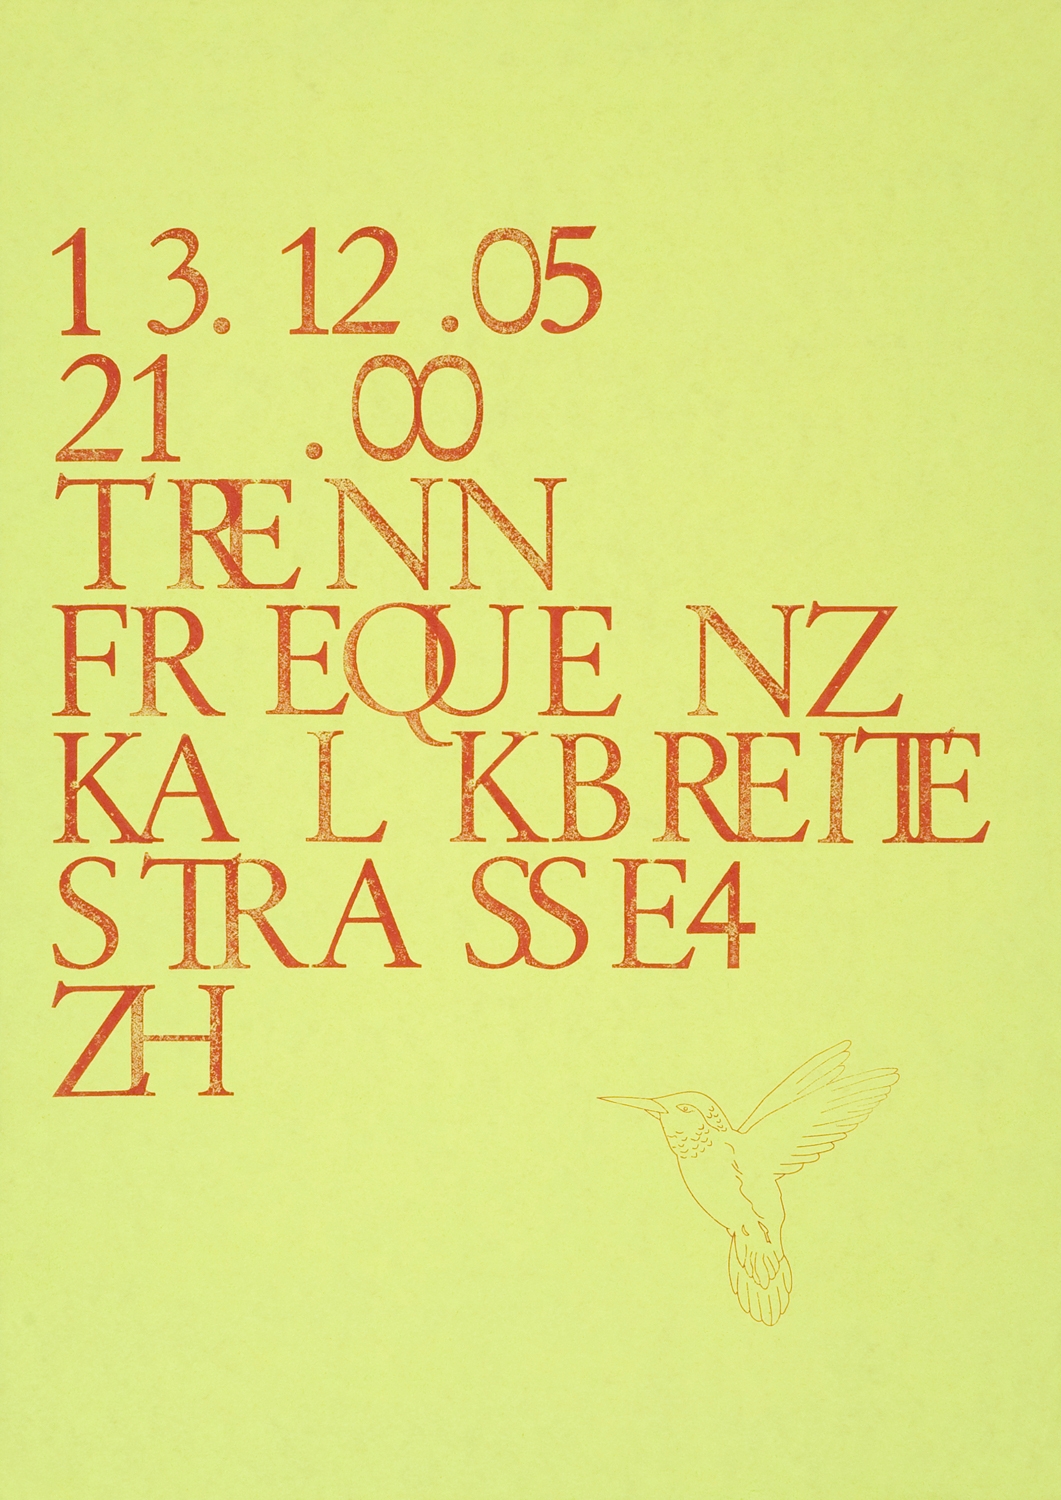 posters, 2003 – 2009